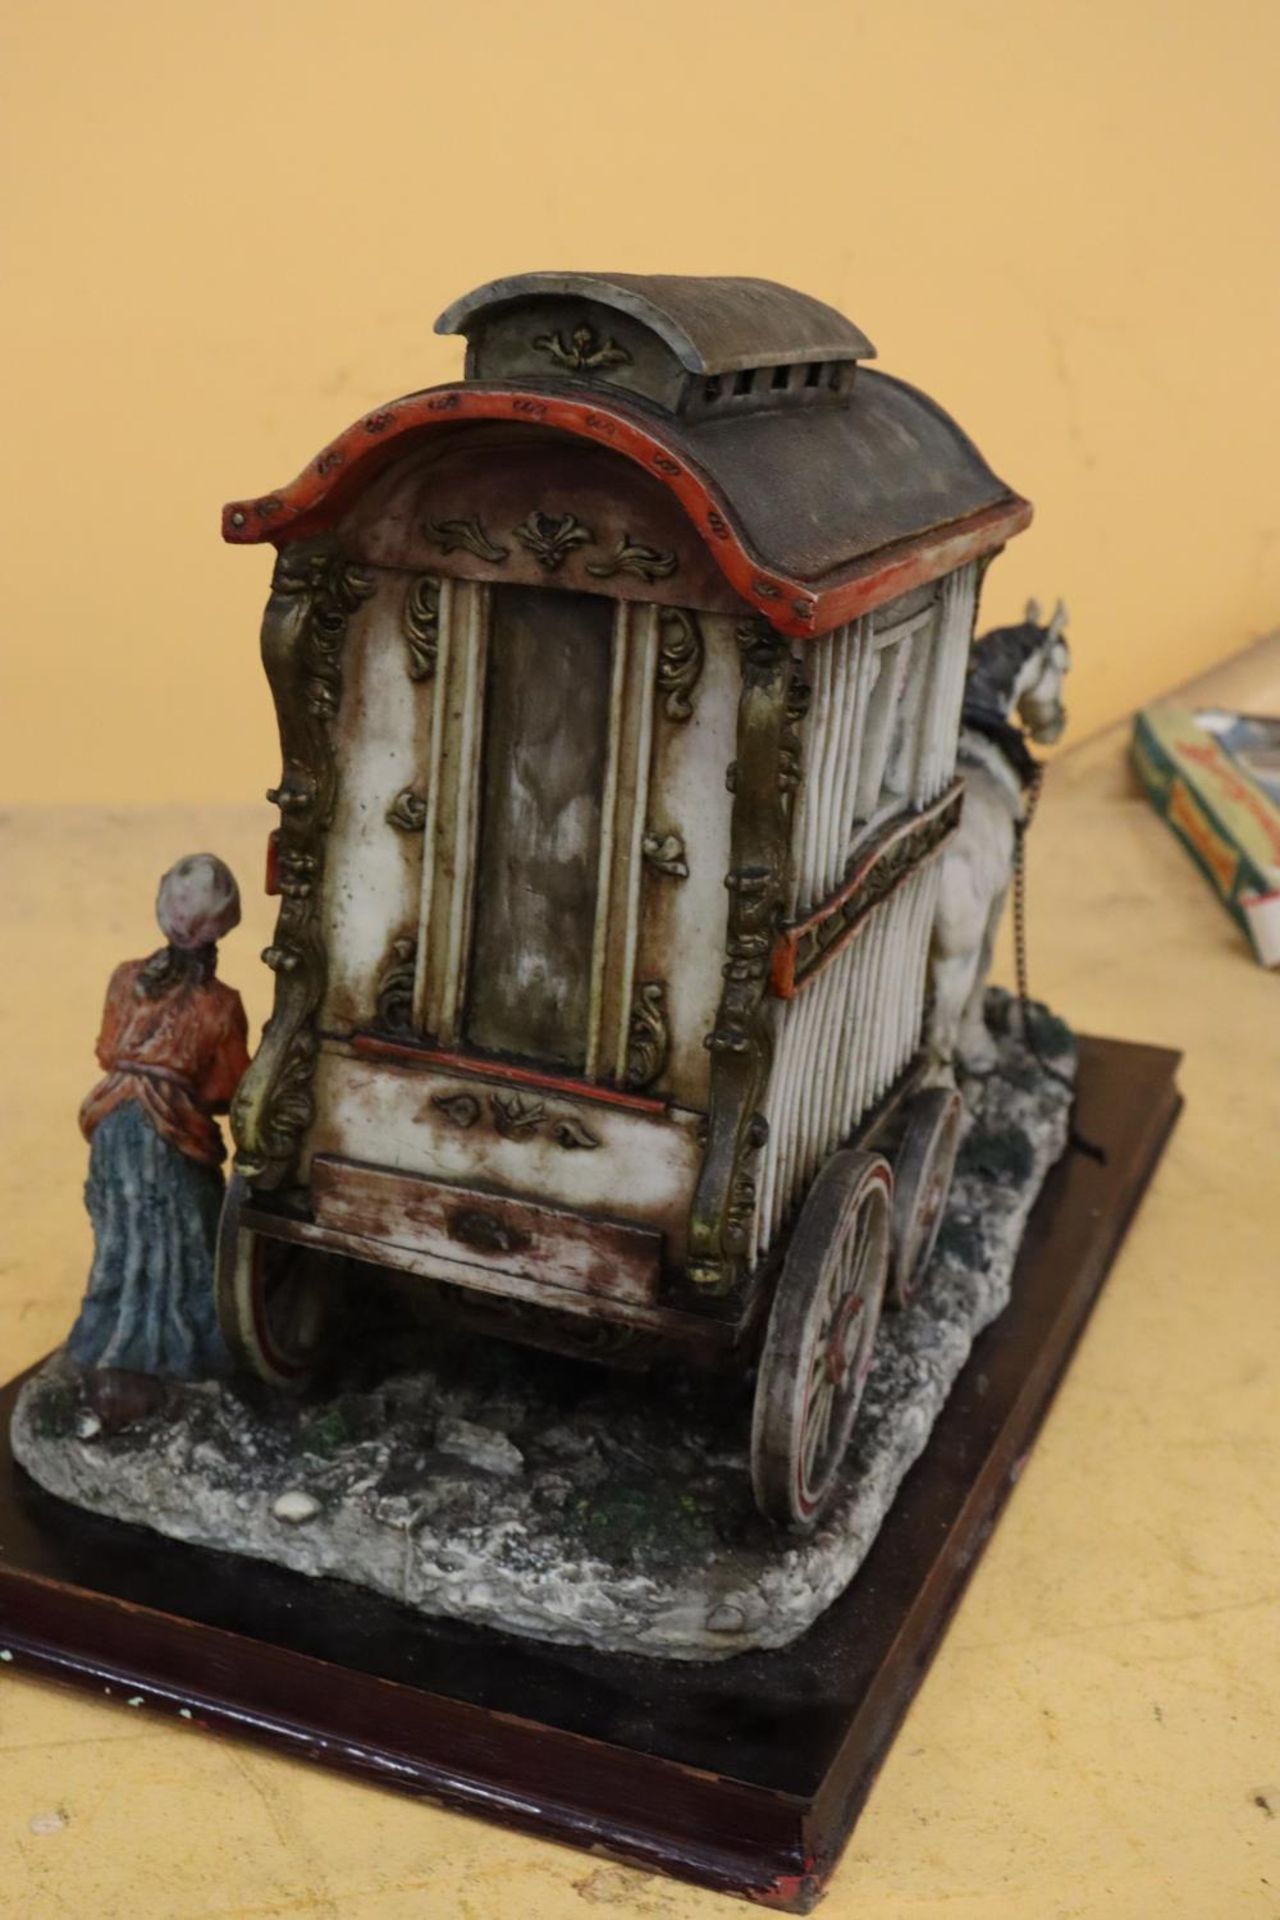 A VERY LARGE 'JULIANA COLLECTION' MODEL OF A ROMANY CARAVAN, HORSES AND FIGURES, ON A WOODEN BASE, - Image 5 of 5